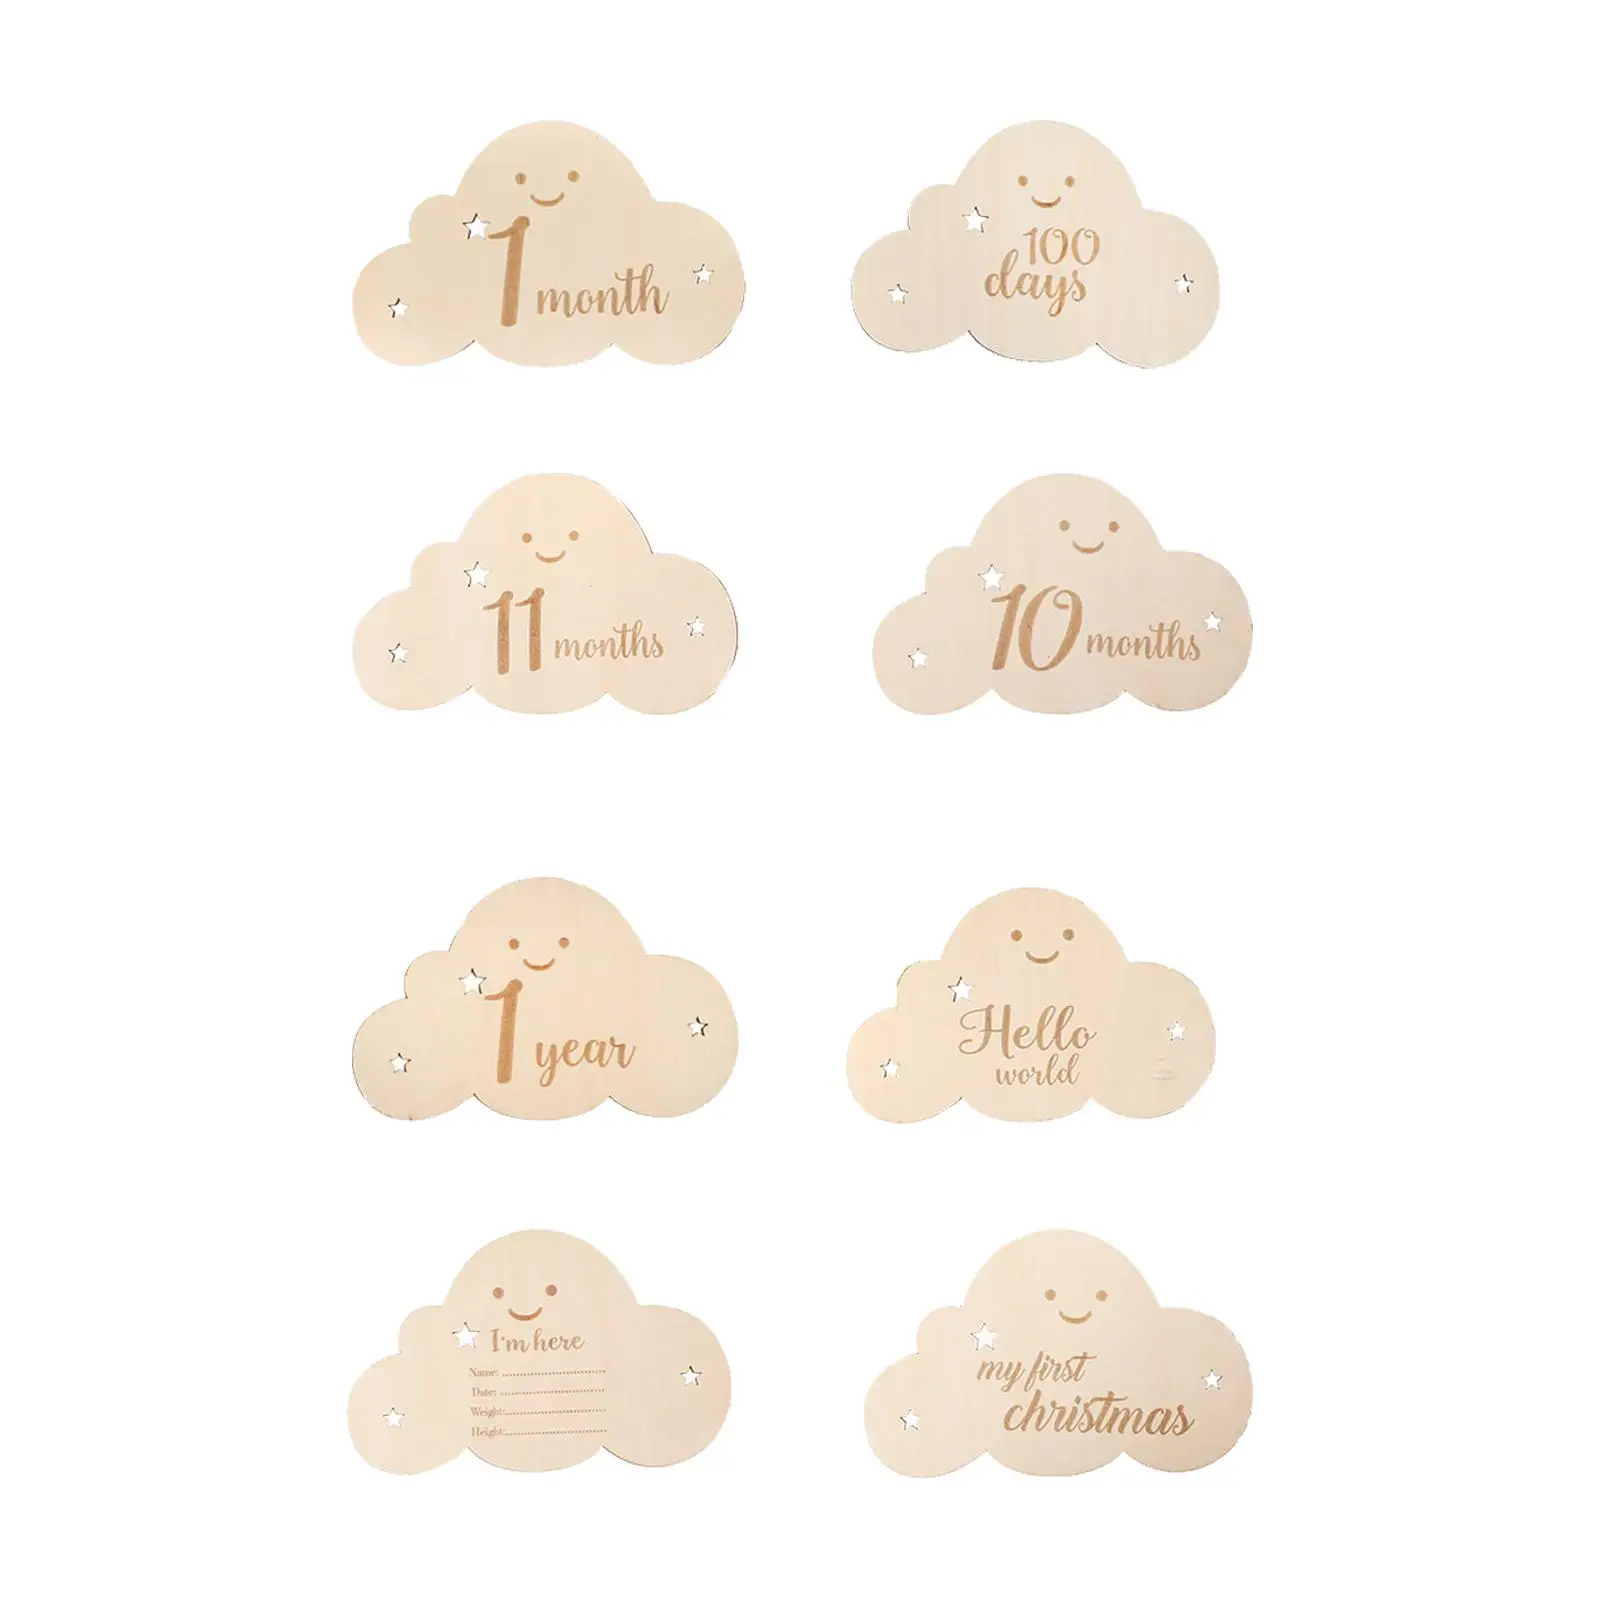 8Pcs Wooden Baby Milestone Cards Engraved Boy Girl Birth Announcement Sign for Newborn to Age 1 Smooth Surface Monthly Stickers